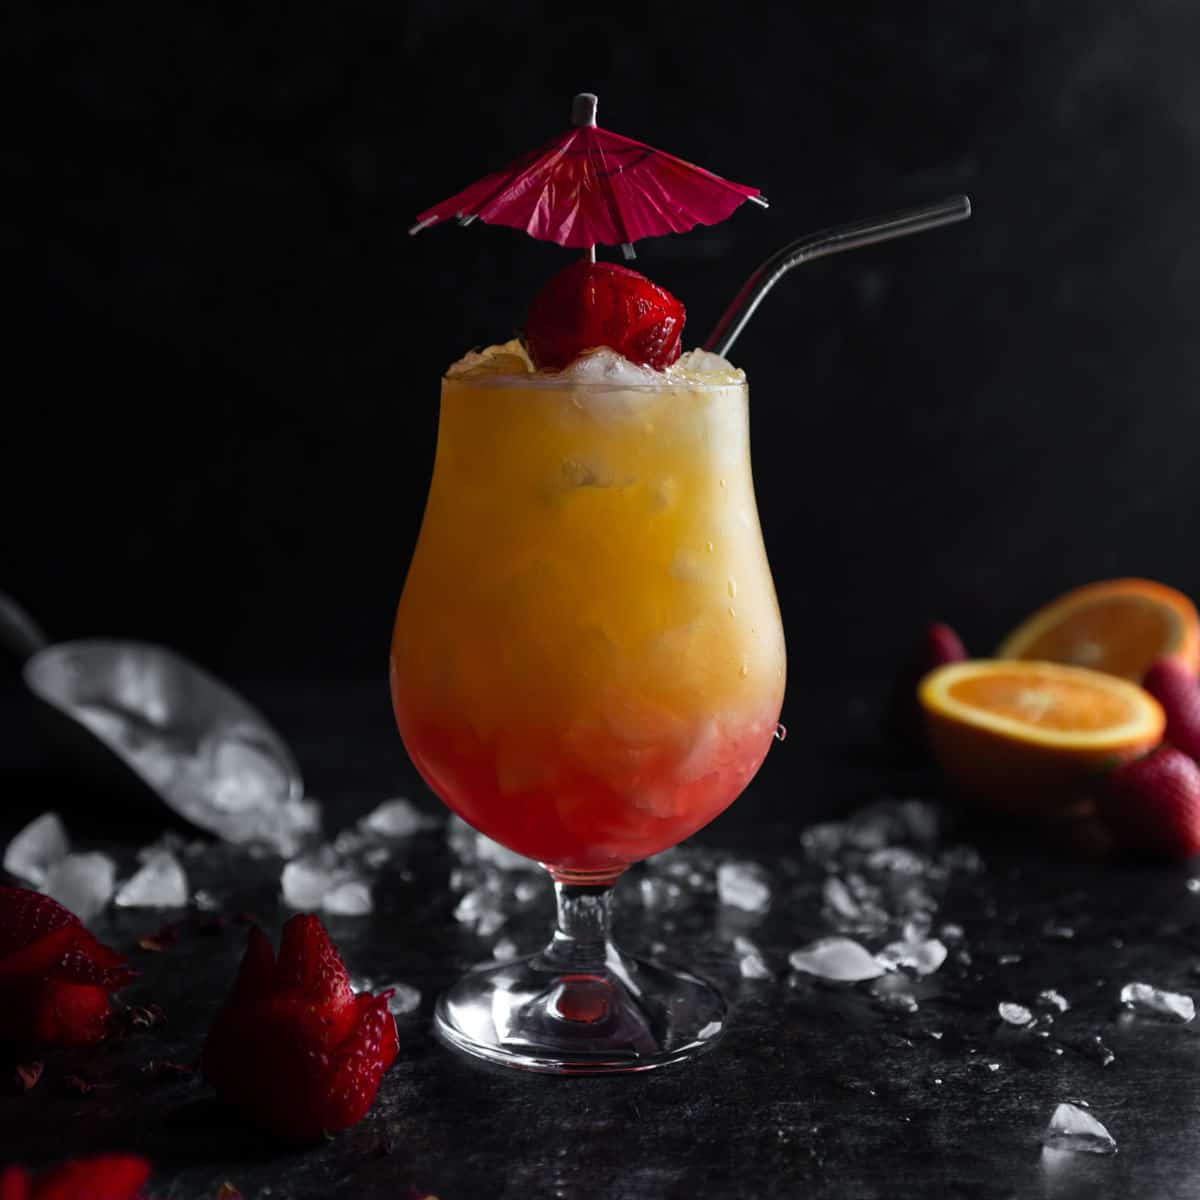 Strawberry Rose Tequila Sunrise garnished with an umbrella